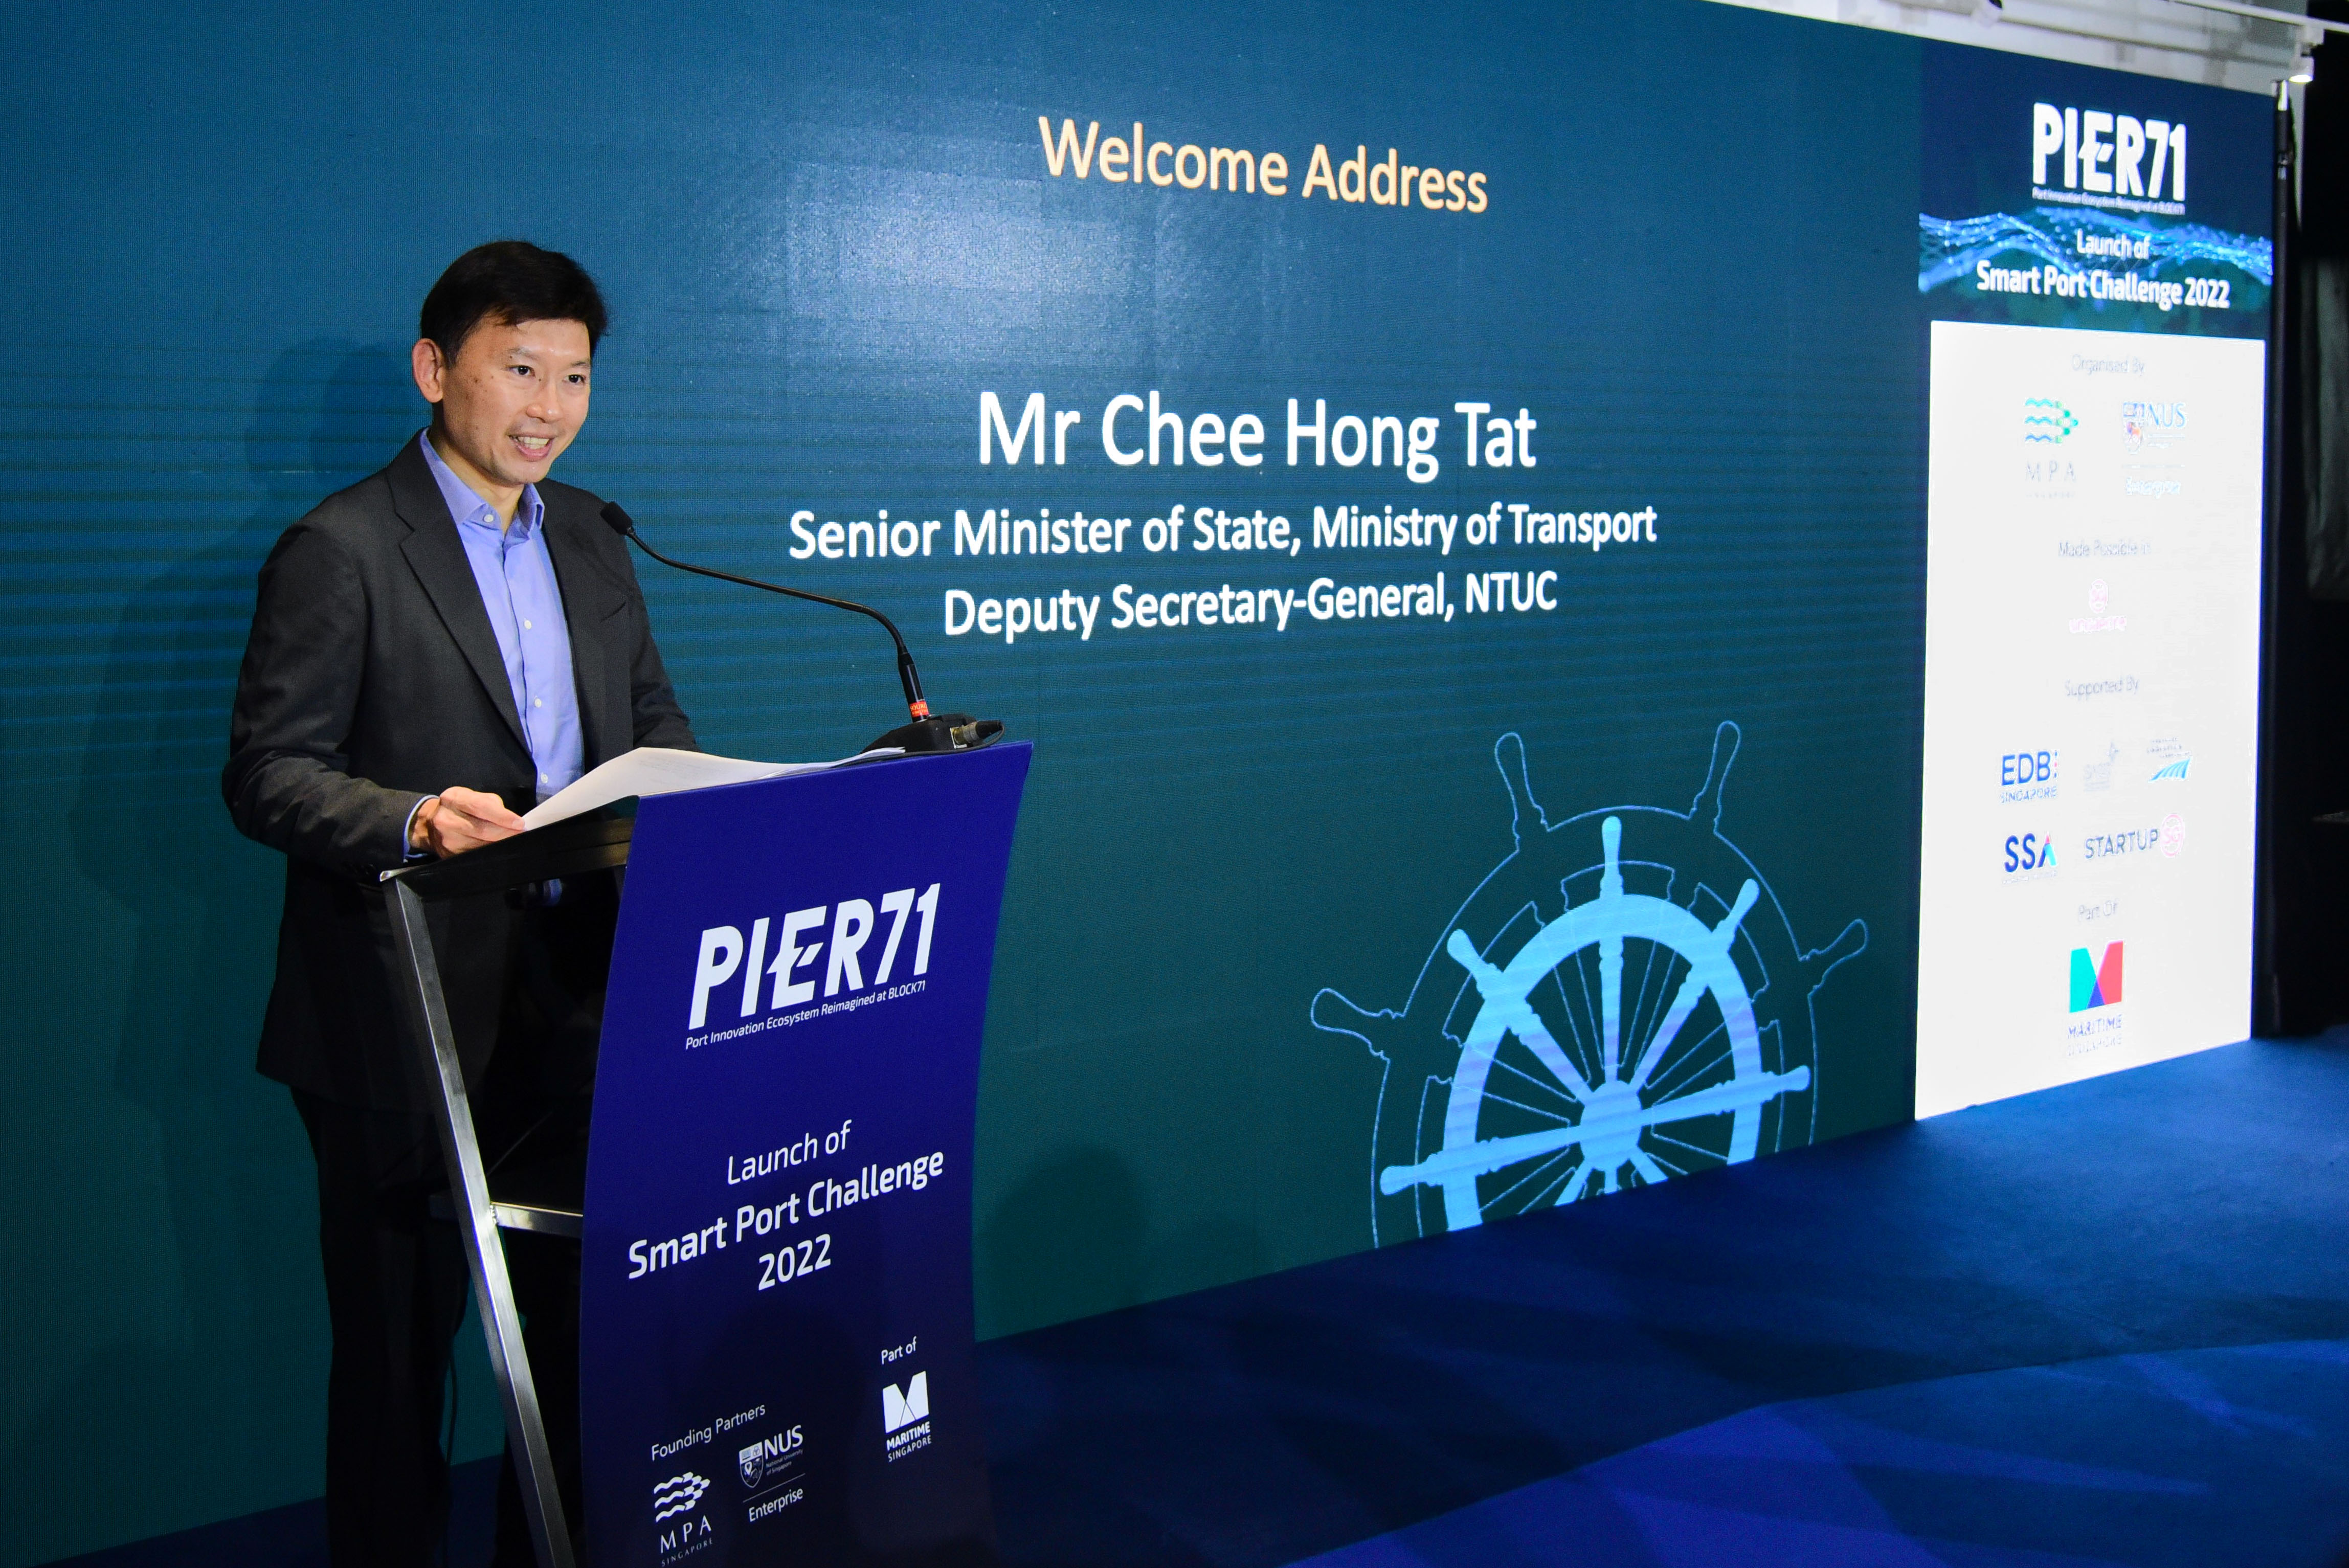 Senior Minister of State, Chee Hong Tat, delivering his opening speech at the launch of Smart Port Challenge 2022